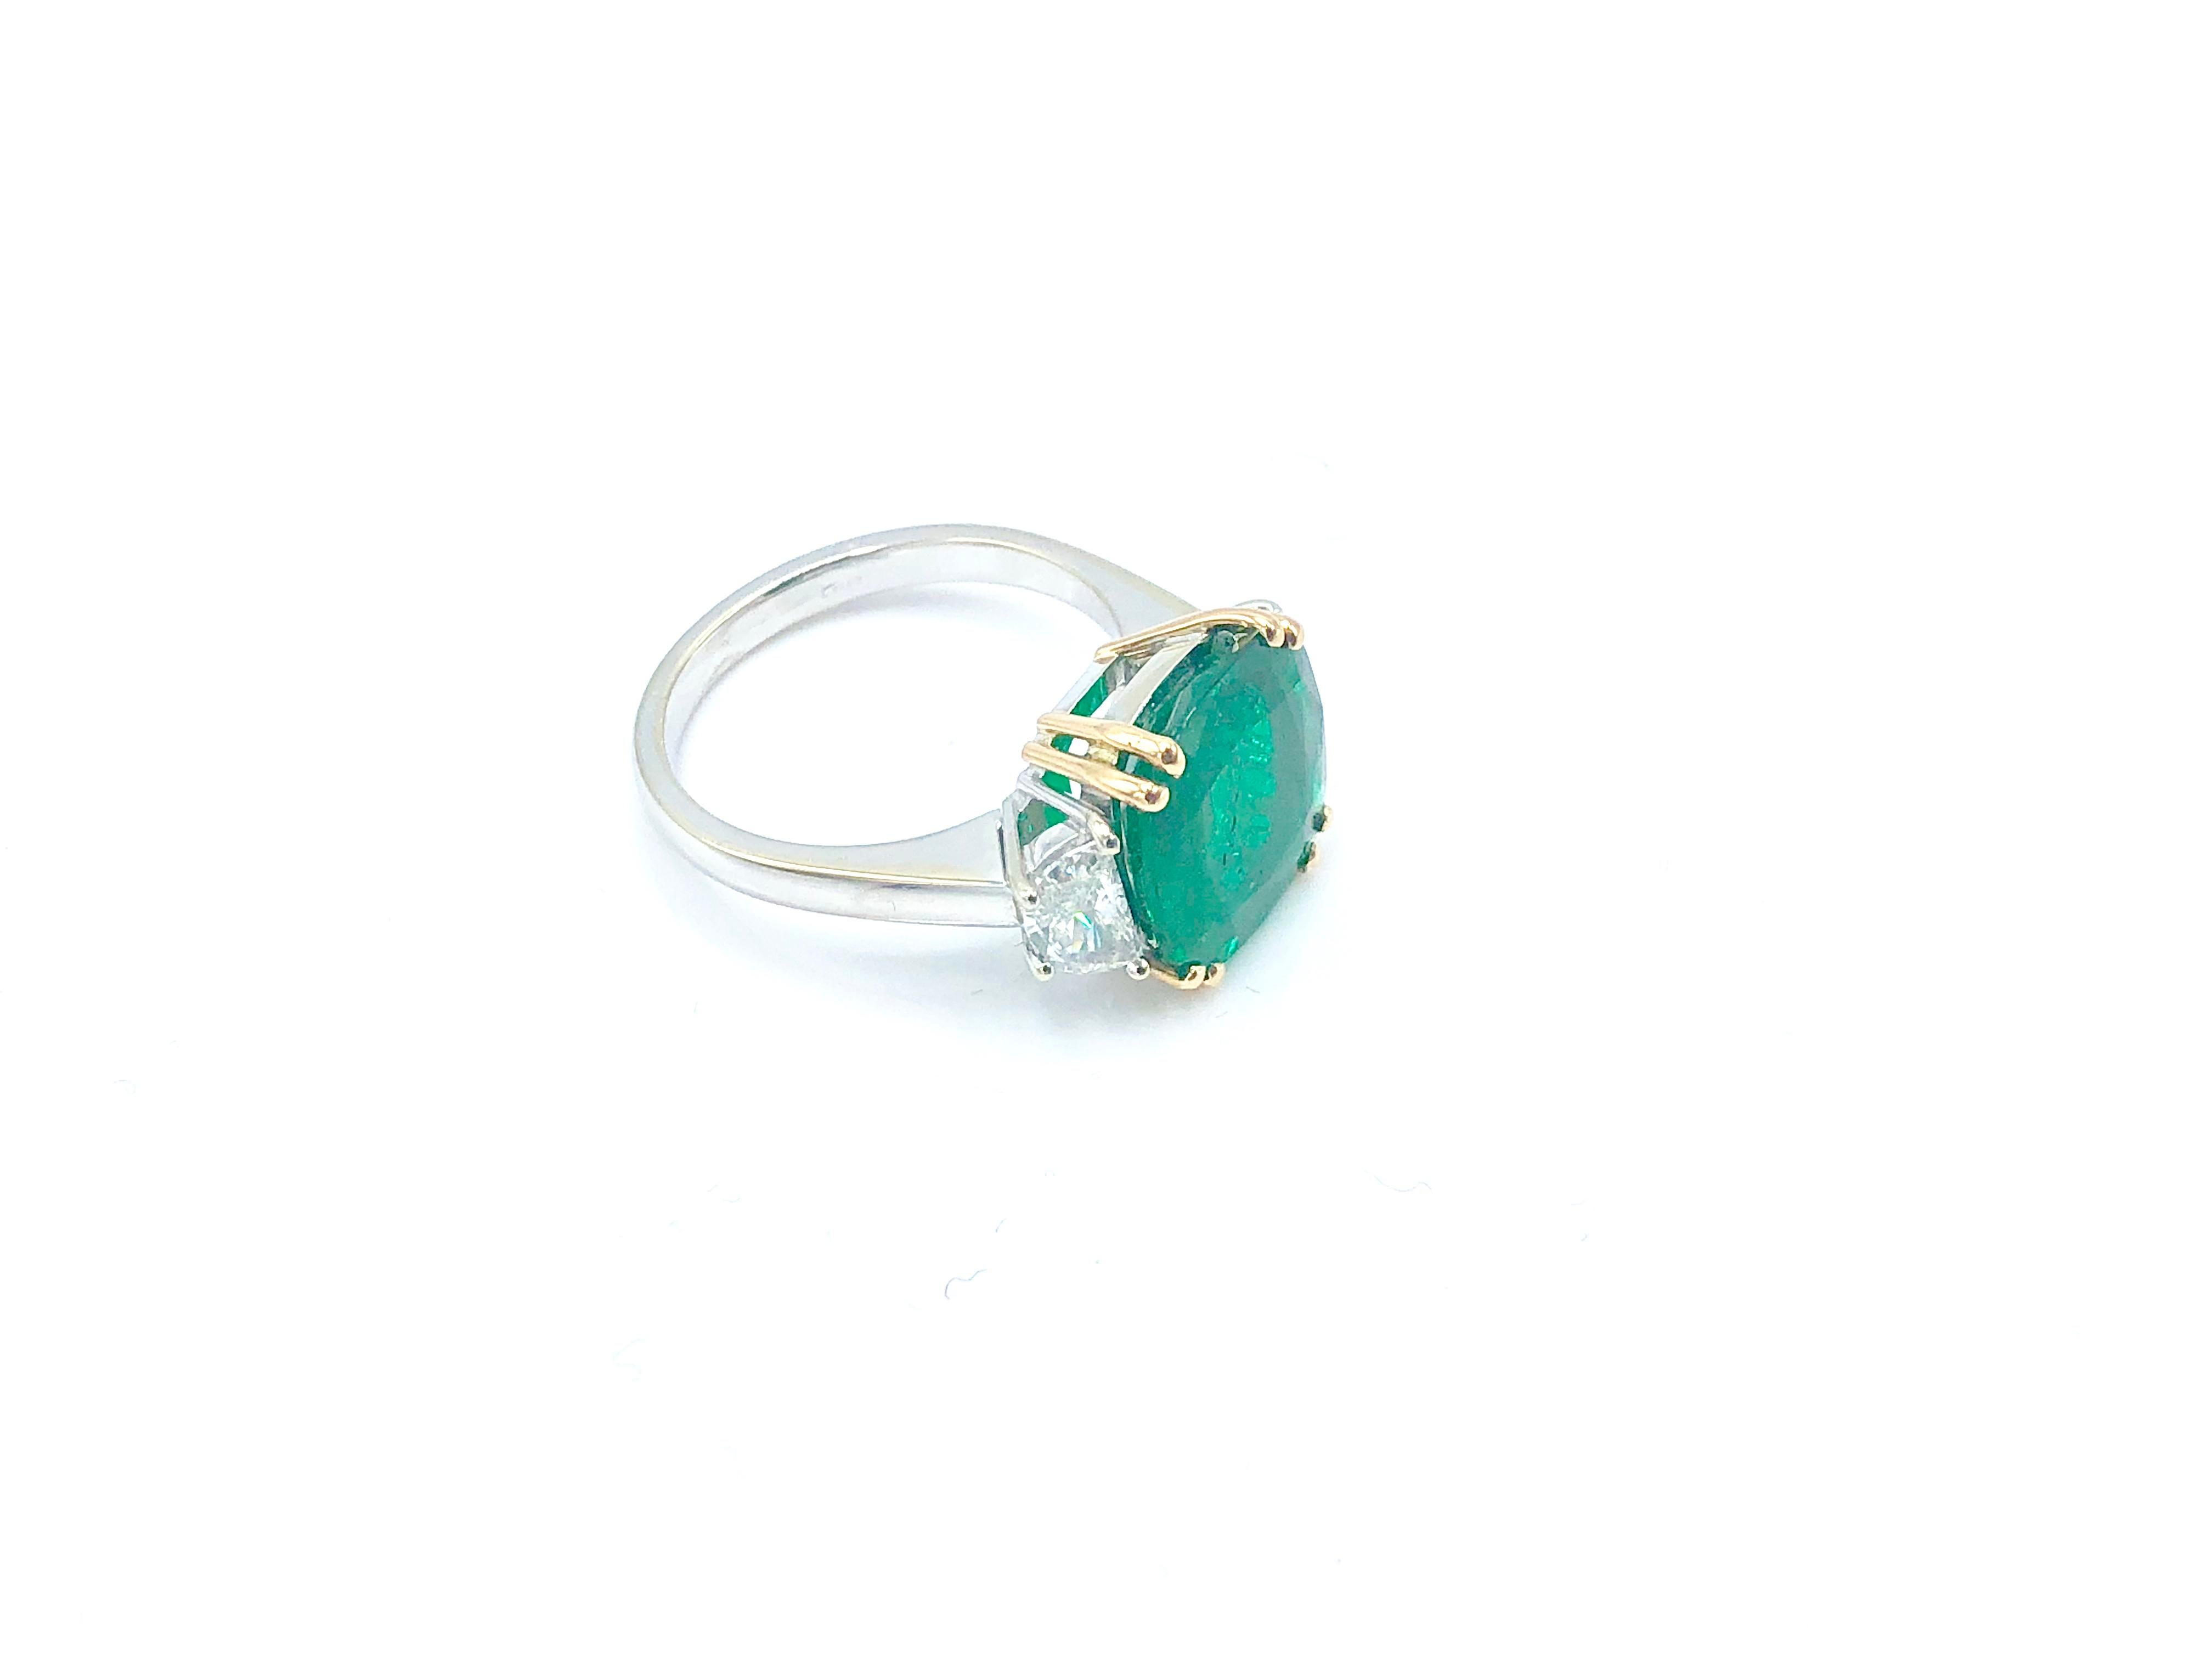 An important ring featuring a 4 carat Colombian minor Oil emerald set between two Half Moon cut diamonds (0.50 ct circa)

Size US 6 1/2 - IT 13